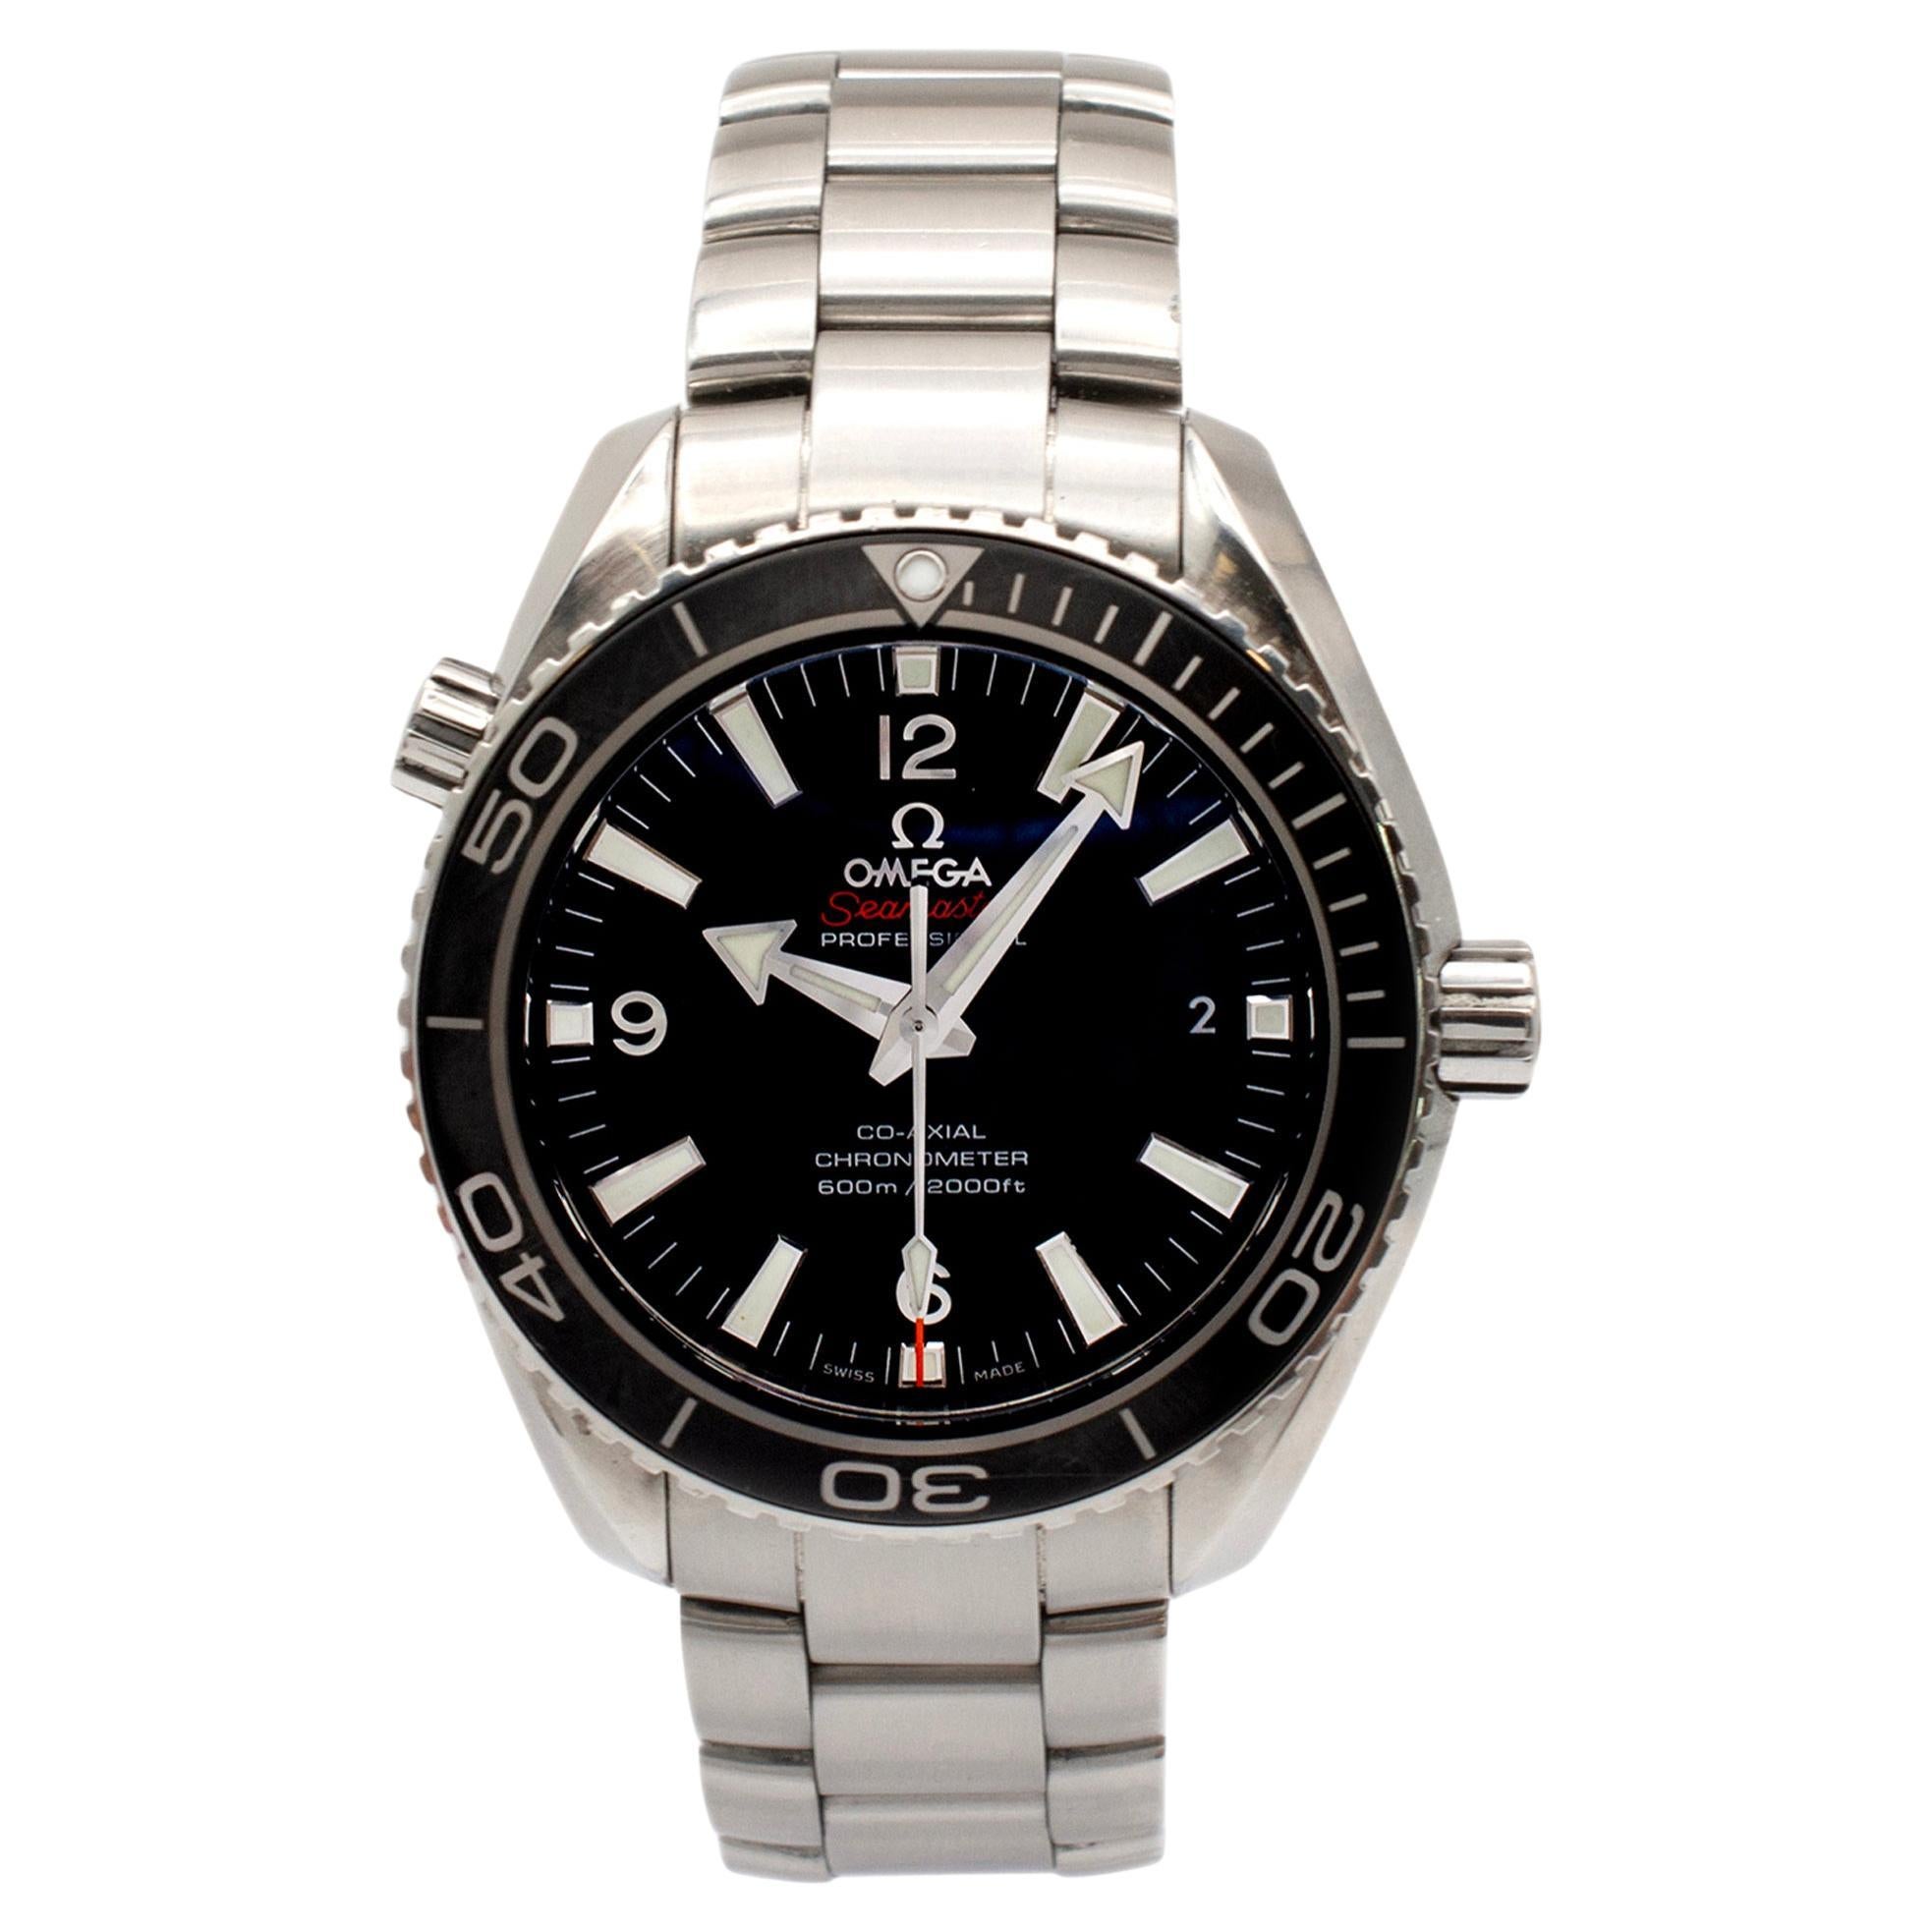 Omega Seamster Planet Ocean 232.30.42.21.01.001 42MM Stainless Steel Men’s Watch For Sale